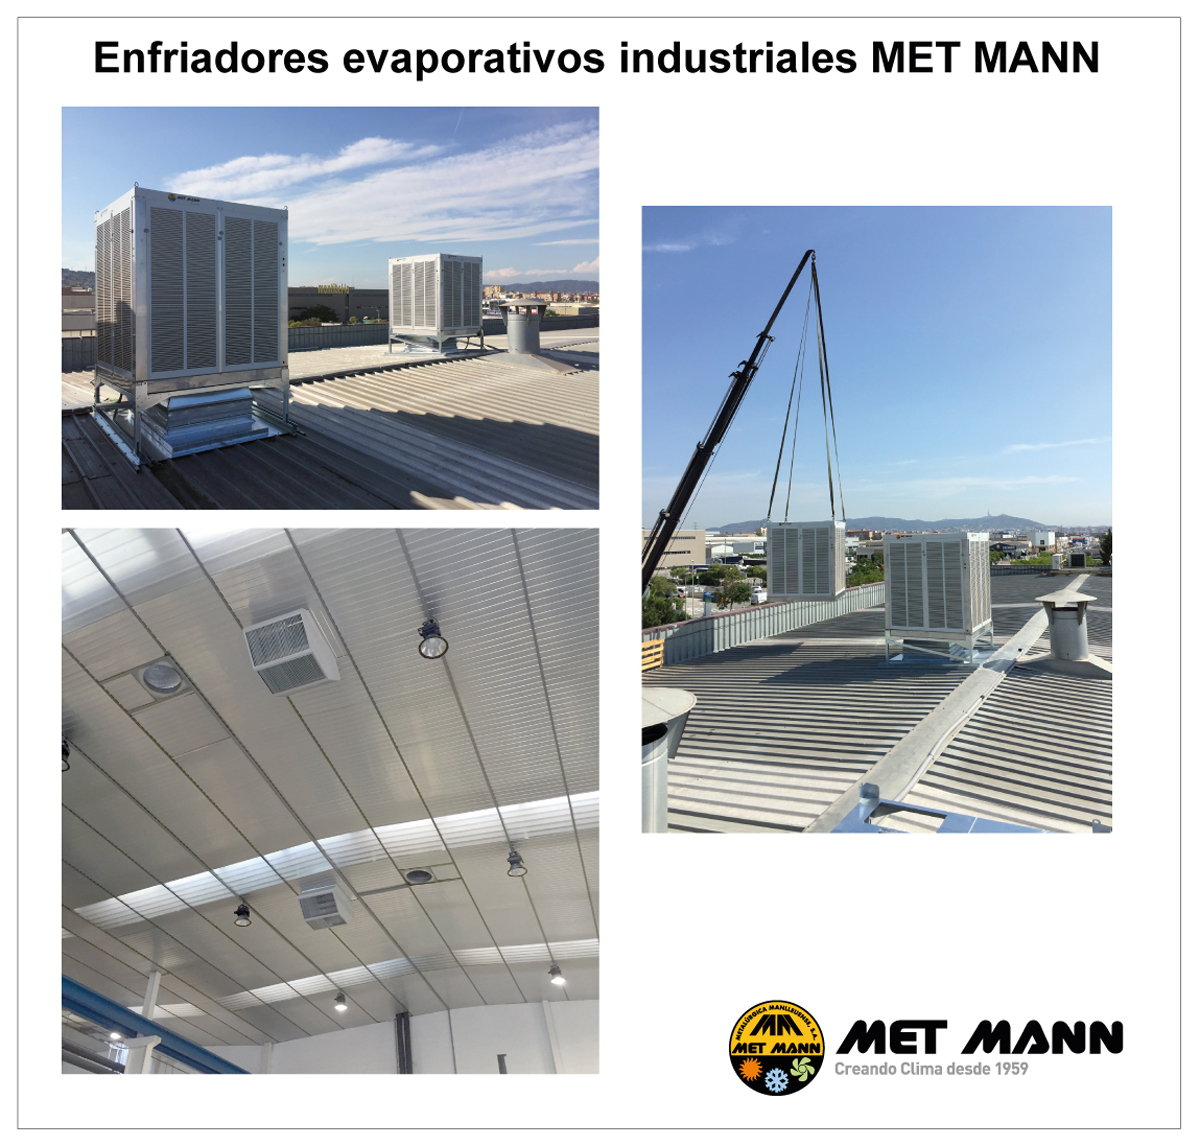 Evaporative air conditioning in plastic industry in Sant Cugat (Barcelona)